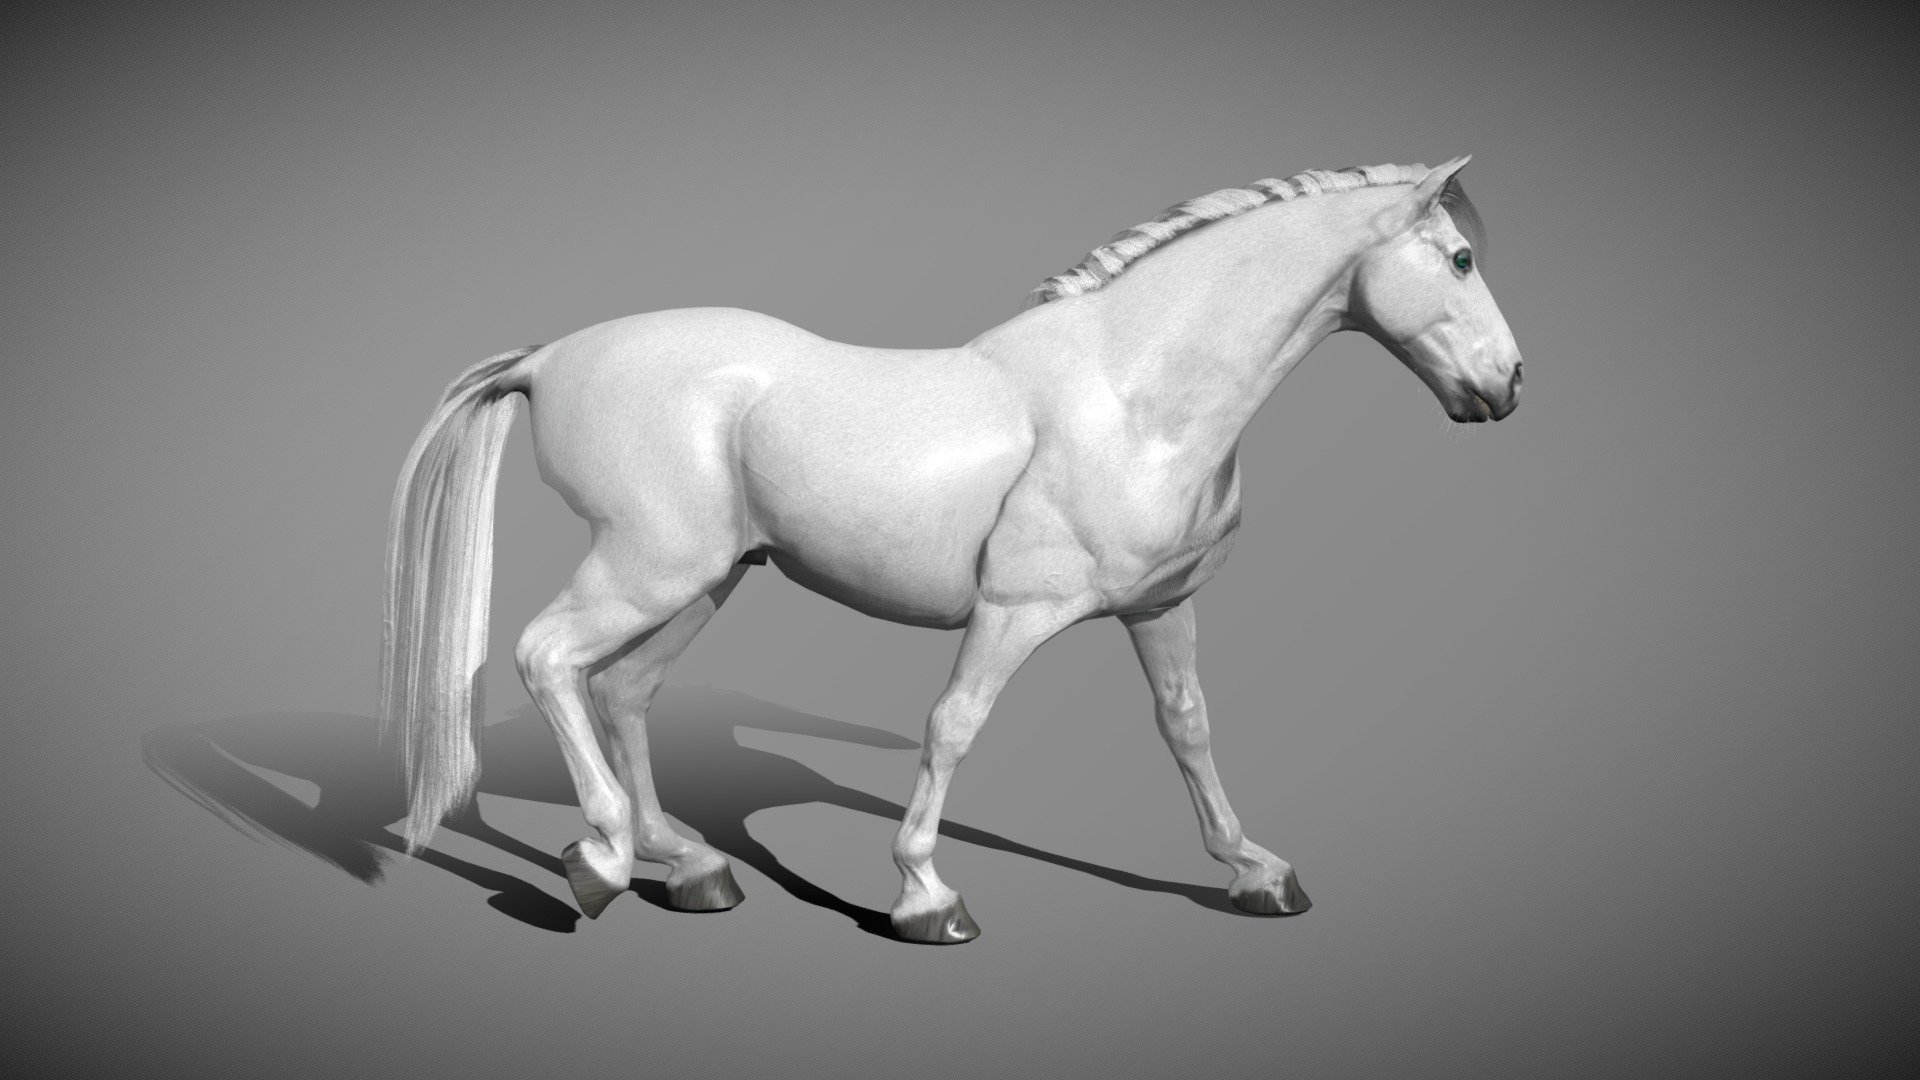 White horse, created in Blender, Zbrush Core and Substance Painter original blender file in the Zip folder uploaded!

Textures 4096x4096:* - body: albedo, roughness, Ambient occlusion, normal, - eyes and teeth: albedo, roughness, Ambient occlusion, normal, opacity - mane and tail: color node, normal and opacity

In https://sketchfab.com/models/e768beead22a4e02a10df627b5057c3f/editthe NLA editor there are 3 option: - walk cycle - run cycle - White horse 2.0 - Buy Royalty Free 3D model by 3dartstevenz 3d model